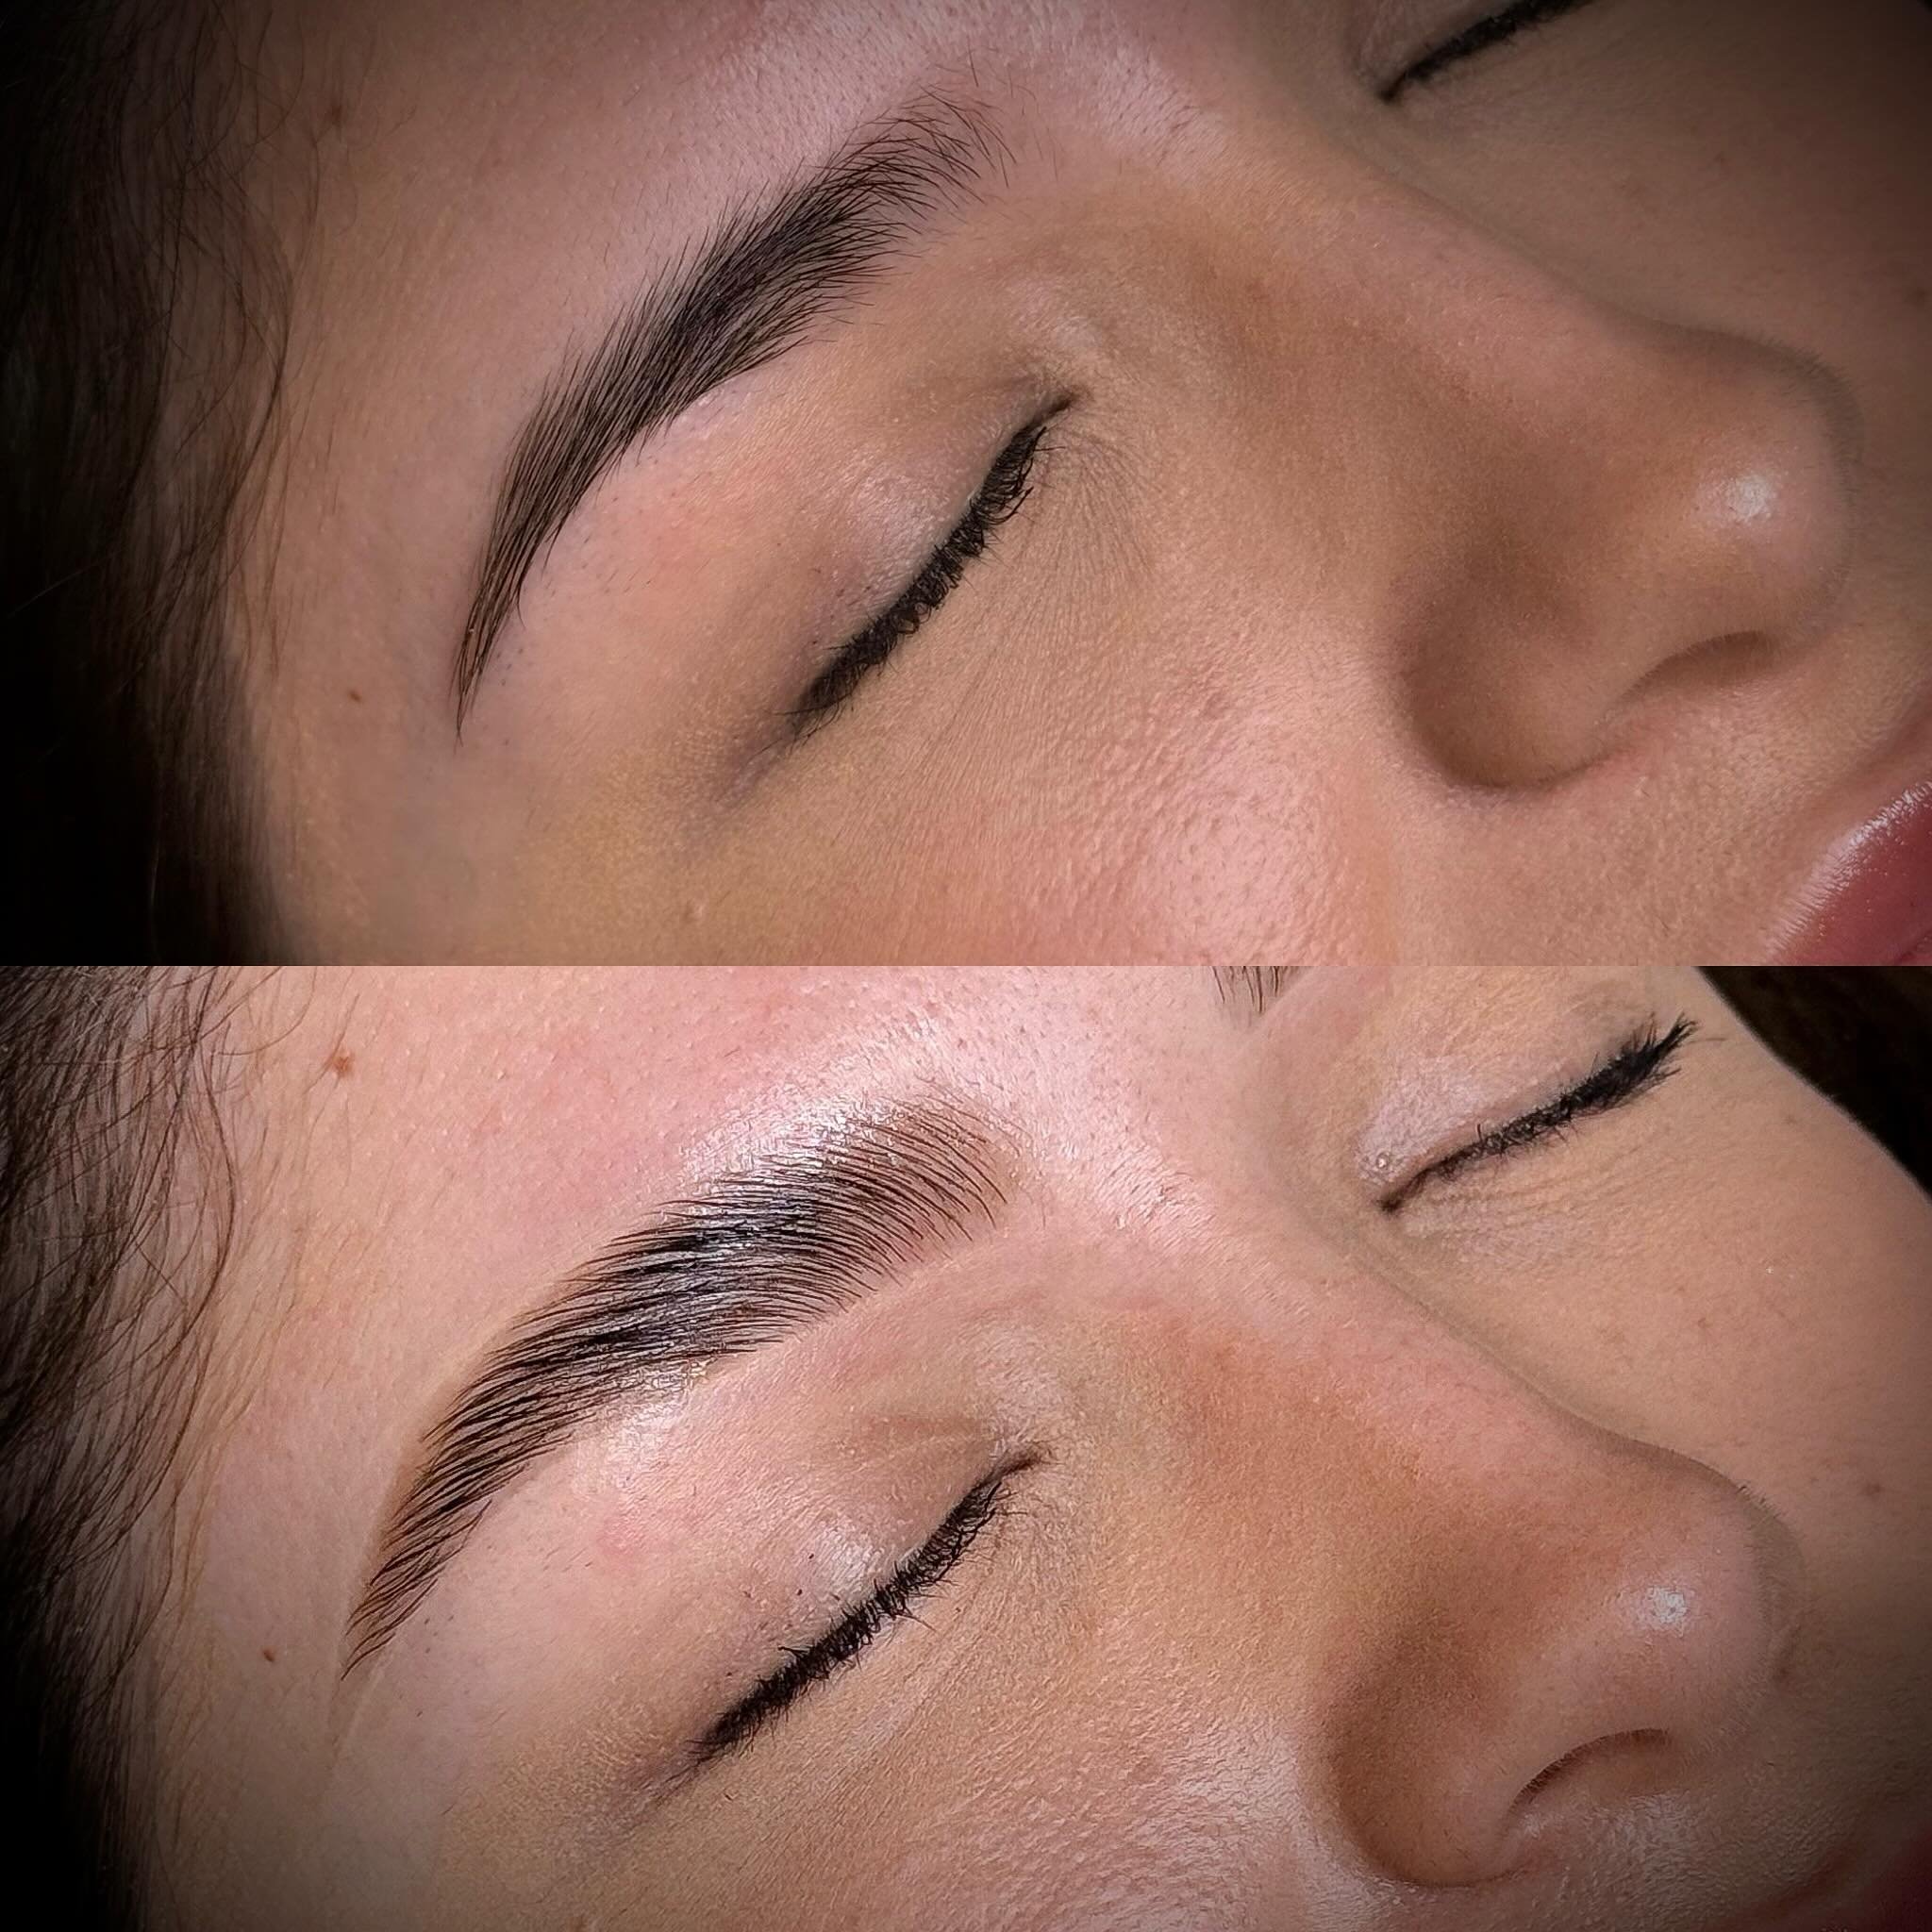 &ldquo;Shape up, eyebrows&rdquo; @dannysimonyi 🖤 catch us in the studio today from 9:00 am -2:00 pm click the link in our bio for more details and appointments 🖤

#browslayer #browsarelife #microbladeartist #microbladebrows #sandiegomicroblading #b